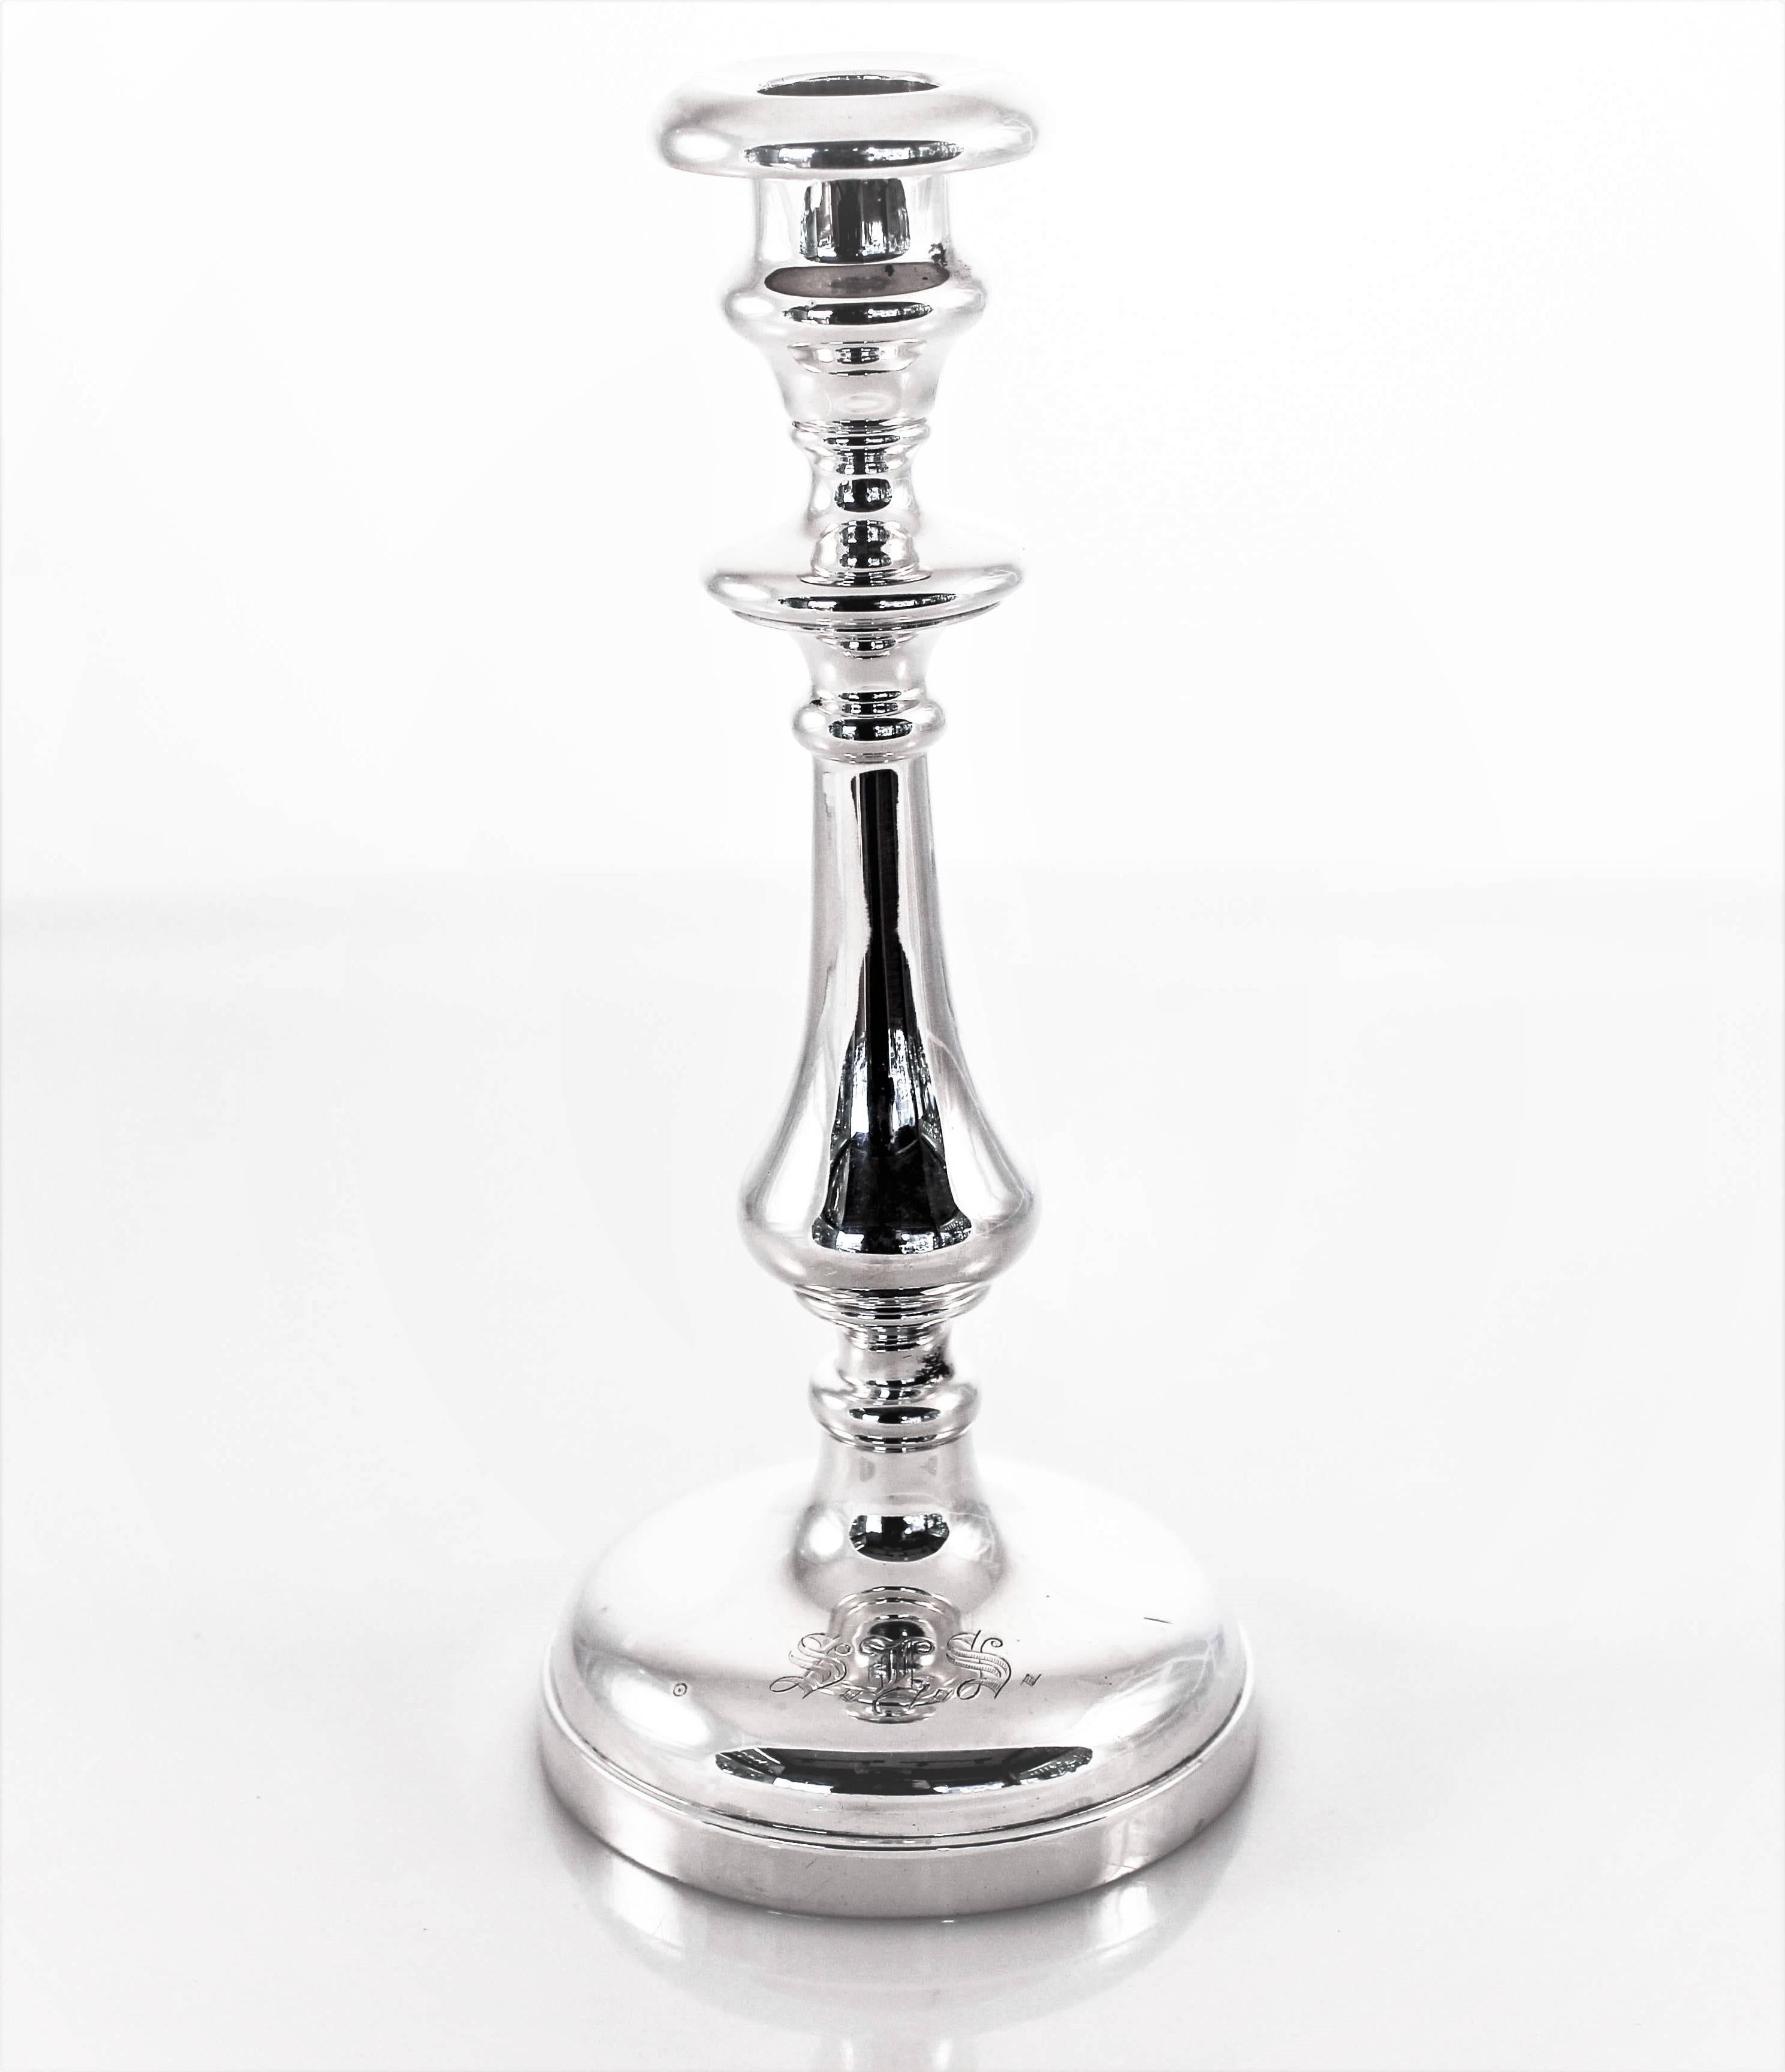 If you’re looking for a great pair of antique sterling candlesticks for an amazing price, continue reading. These Gorham sticks are signed, 1907 and have a simple modern look. One hundred and ten years later, these candlesticks are still around to